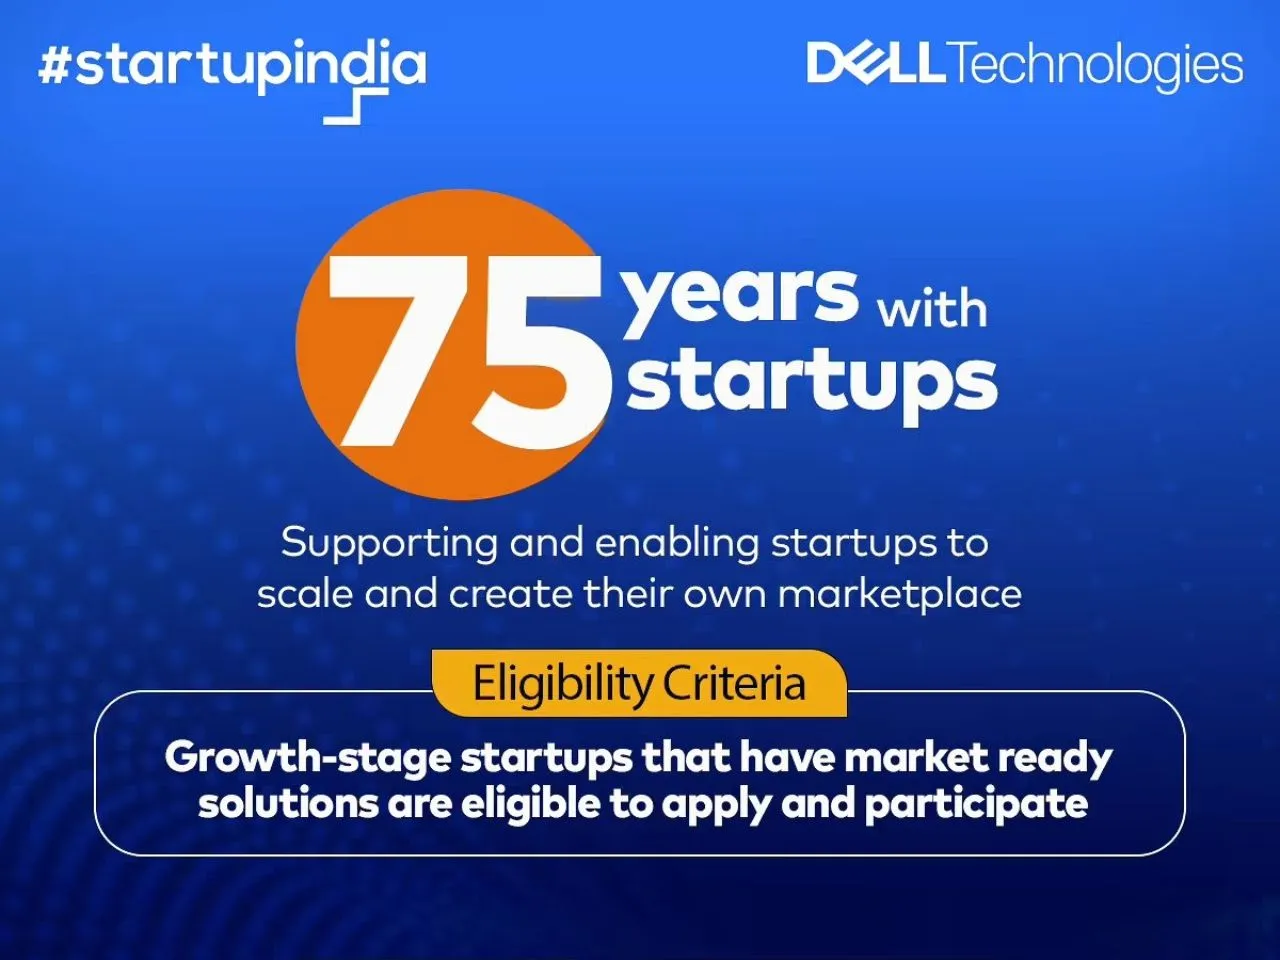 Dell Business Masterclass: To Empower Early Stage Tech Startups